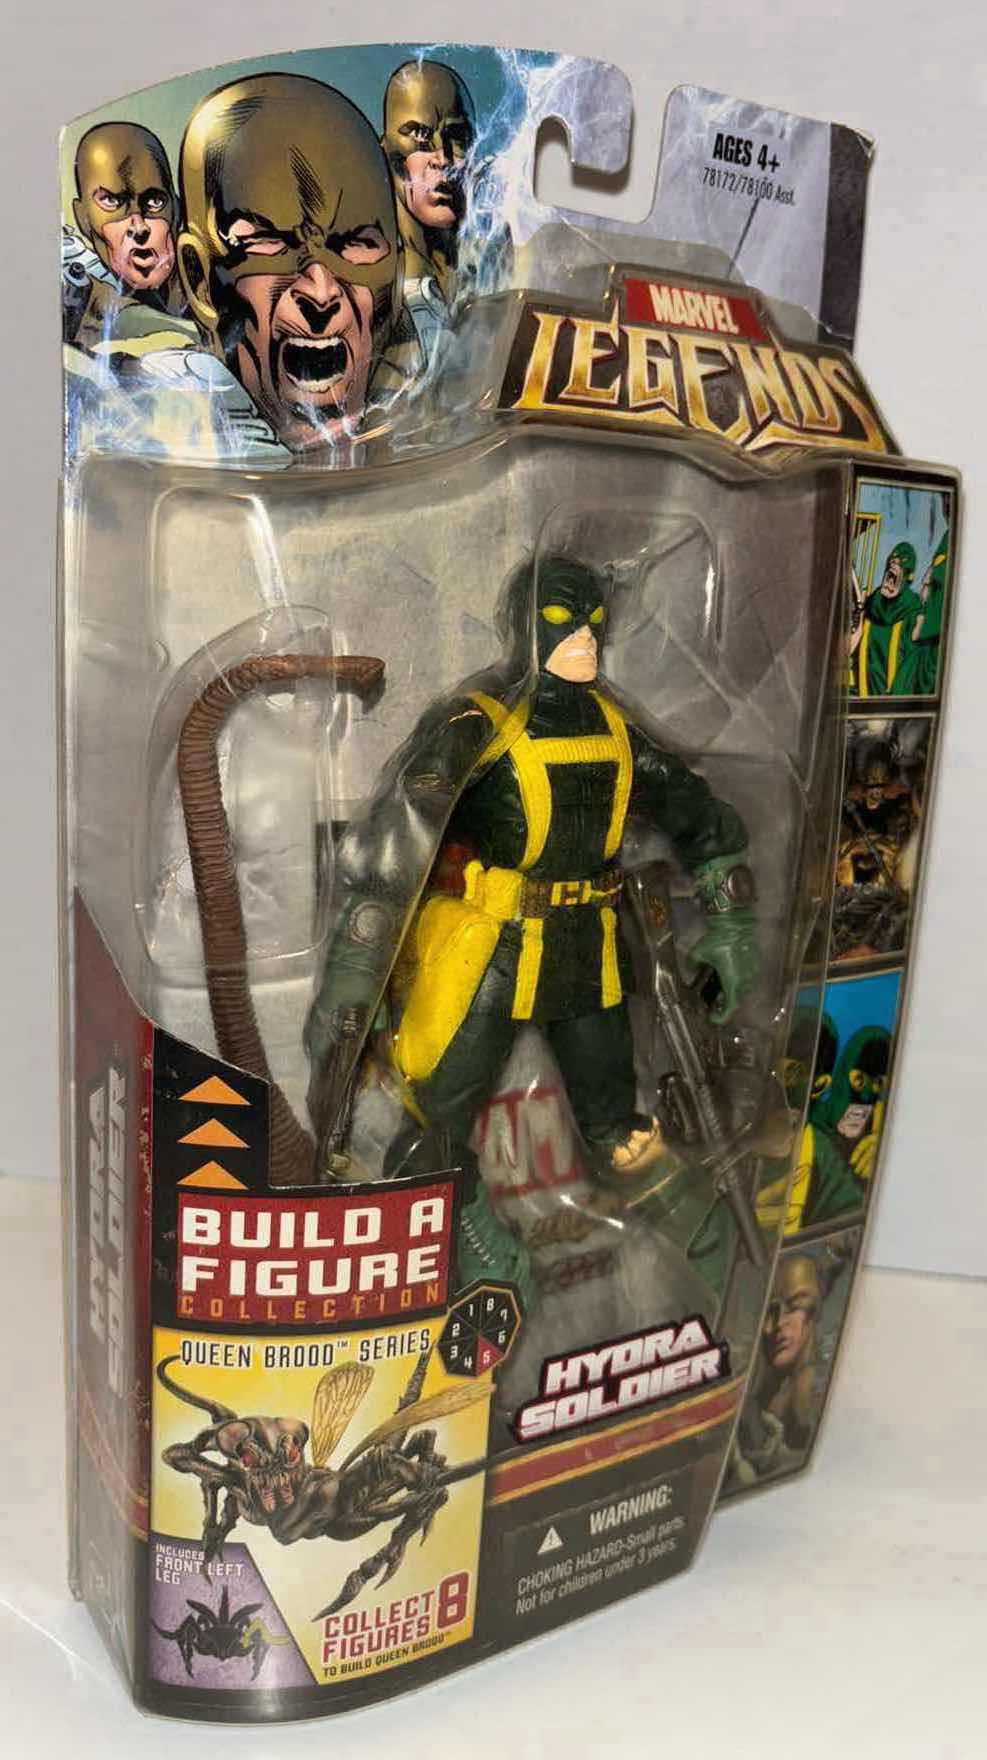 Photo 2 of NEW HASBRO MARVEL LEGENDS BUILD A FIGURE COLLECTION “HYDRA SOLDIER” ACTION FIGURE & ACCESSORIES 2-PACK